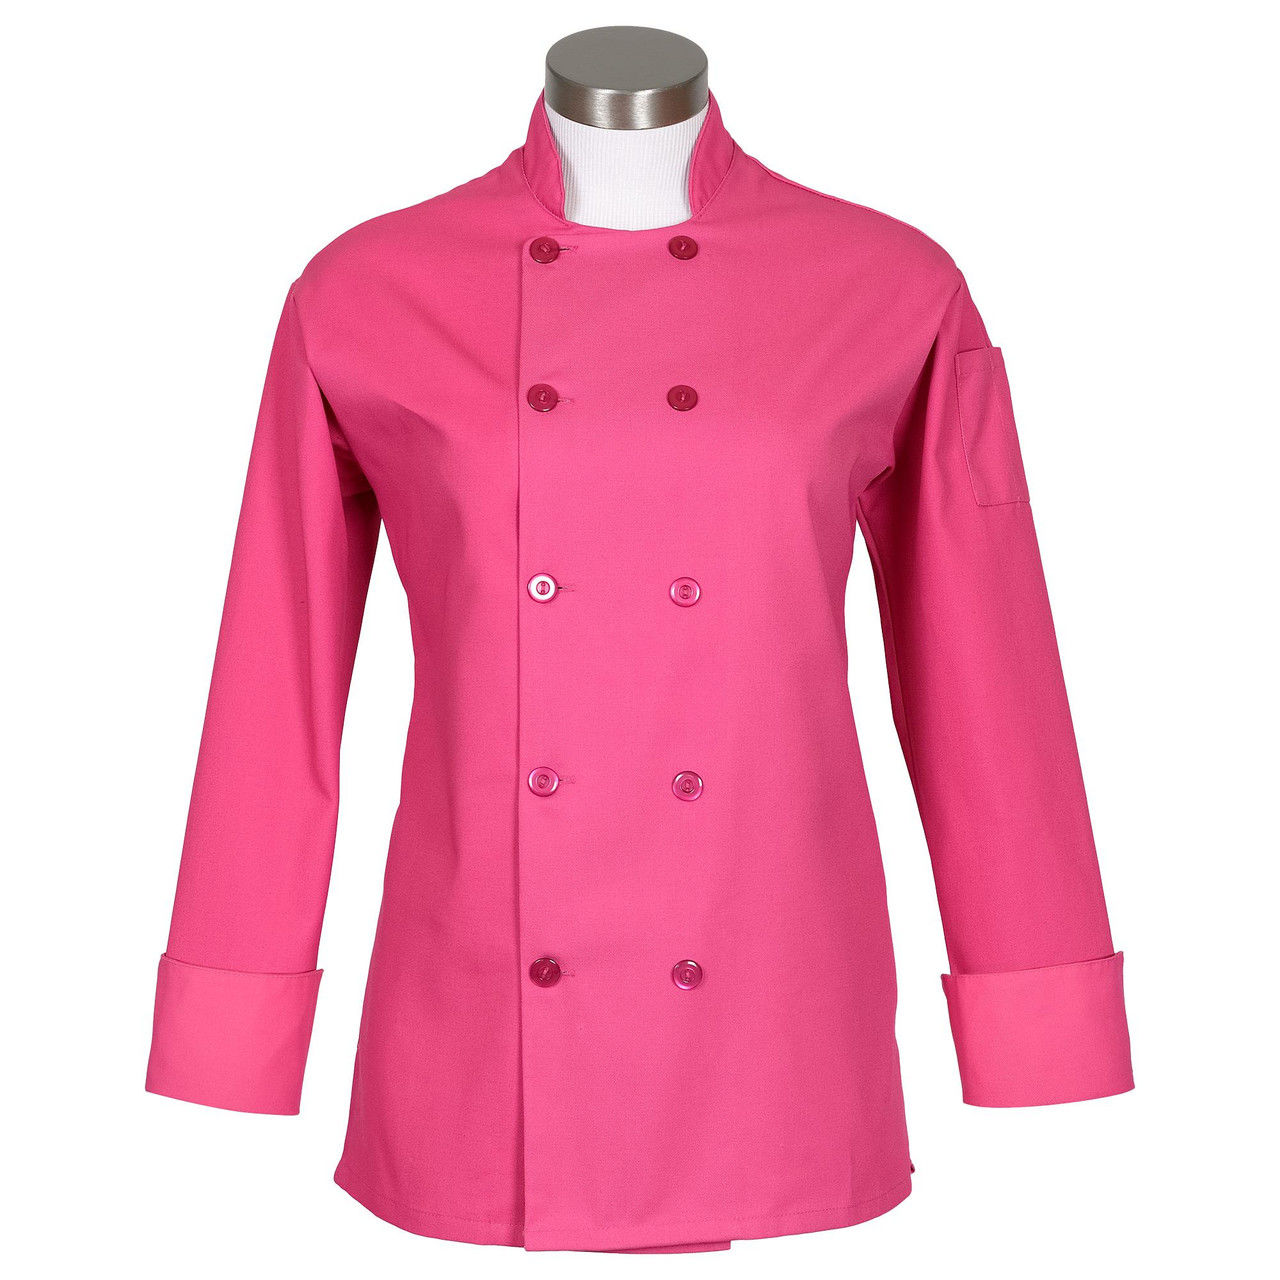 What's the shipping transit time for chef coats womens long sleeve?